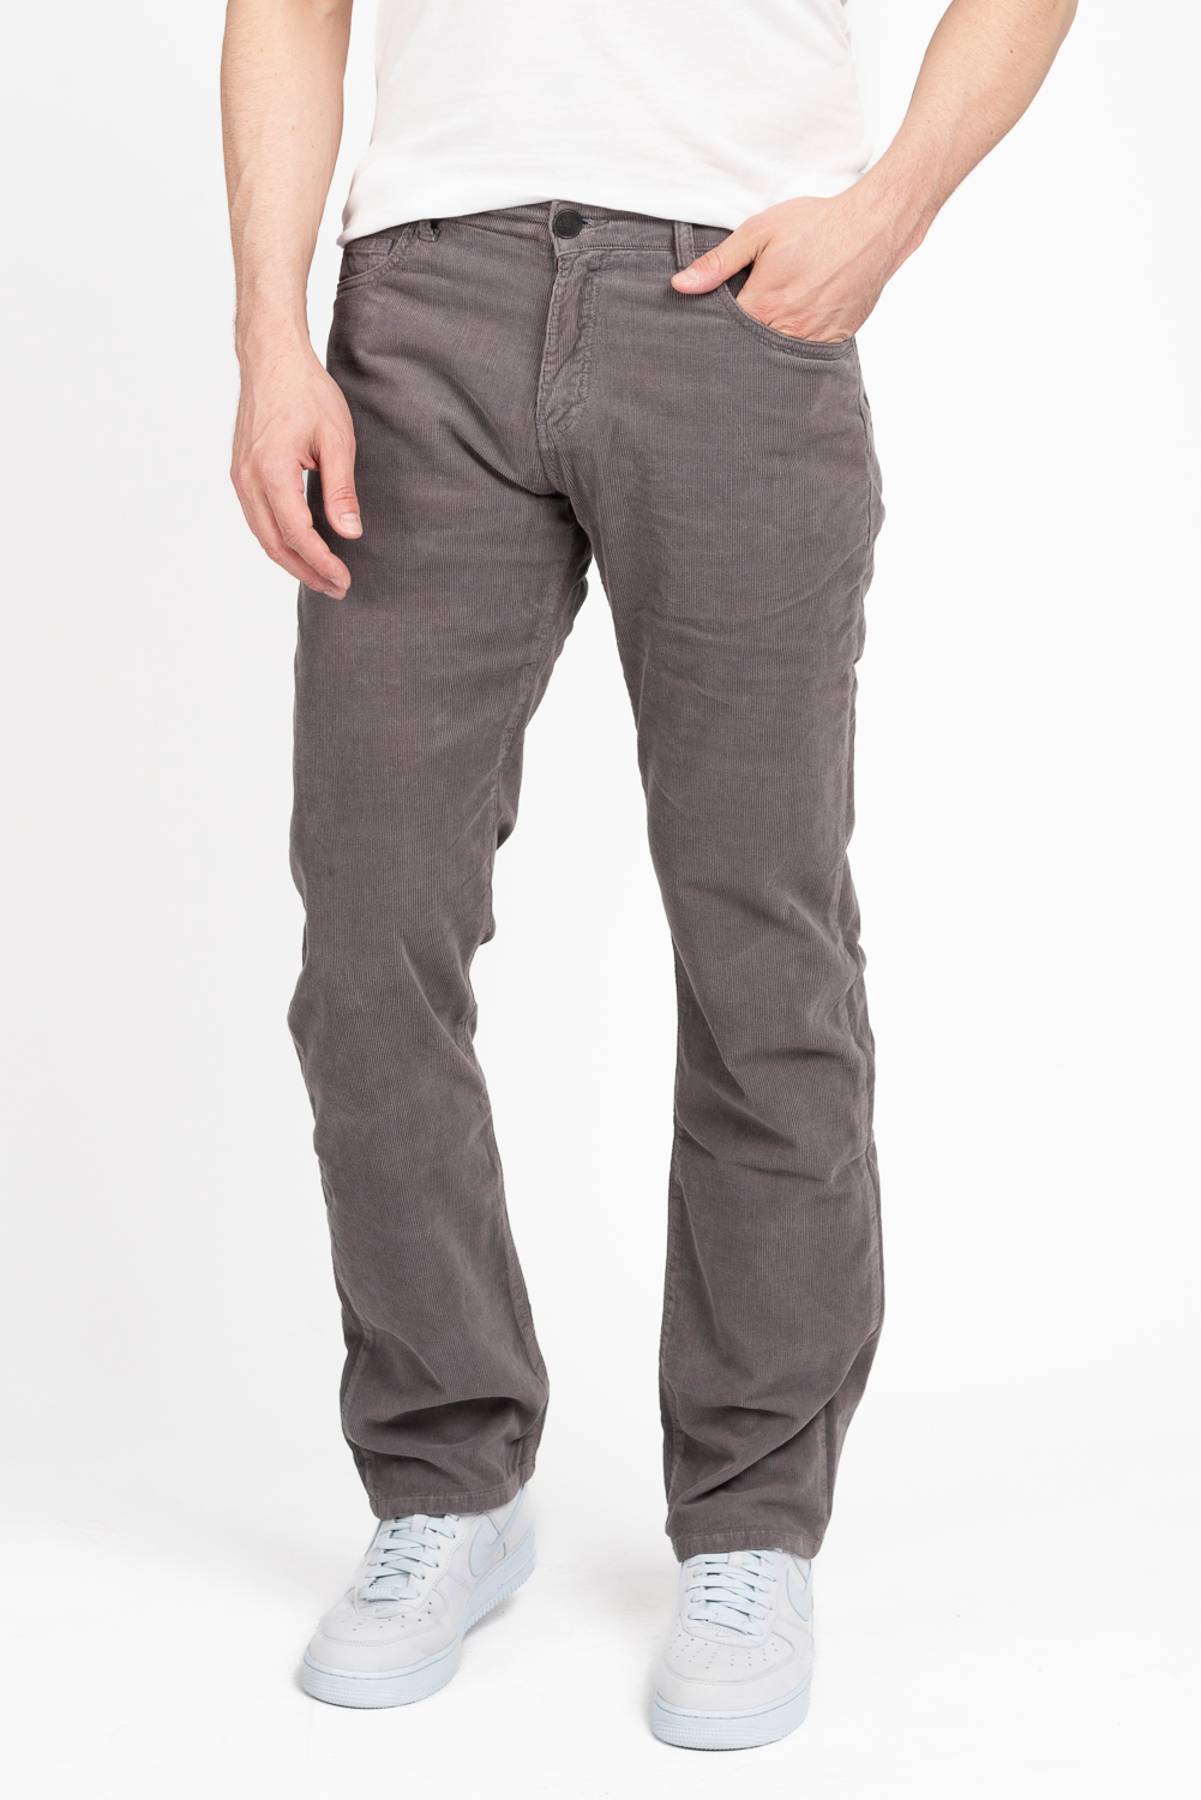 High Roller Fit Charcoal Corduroy